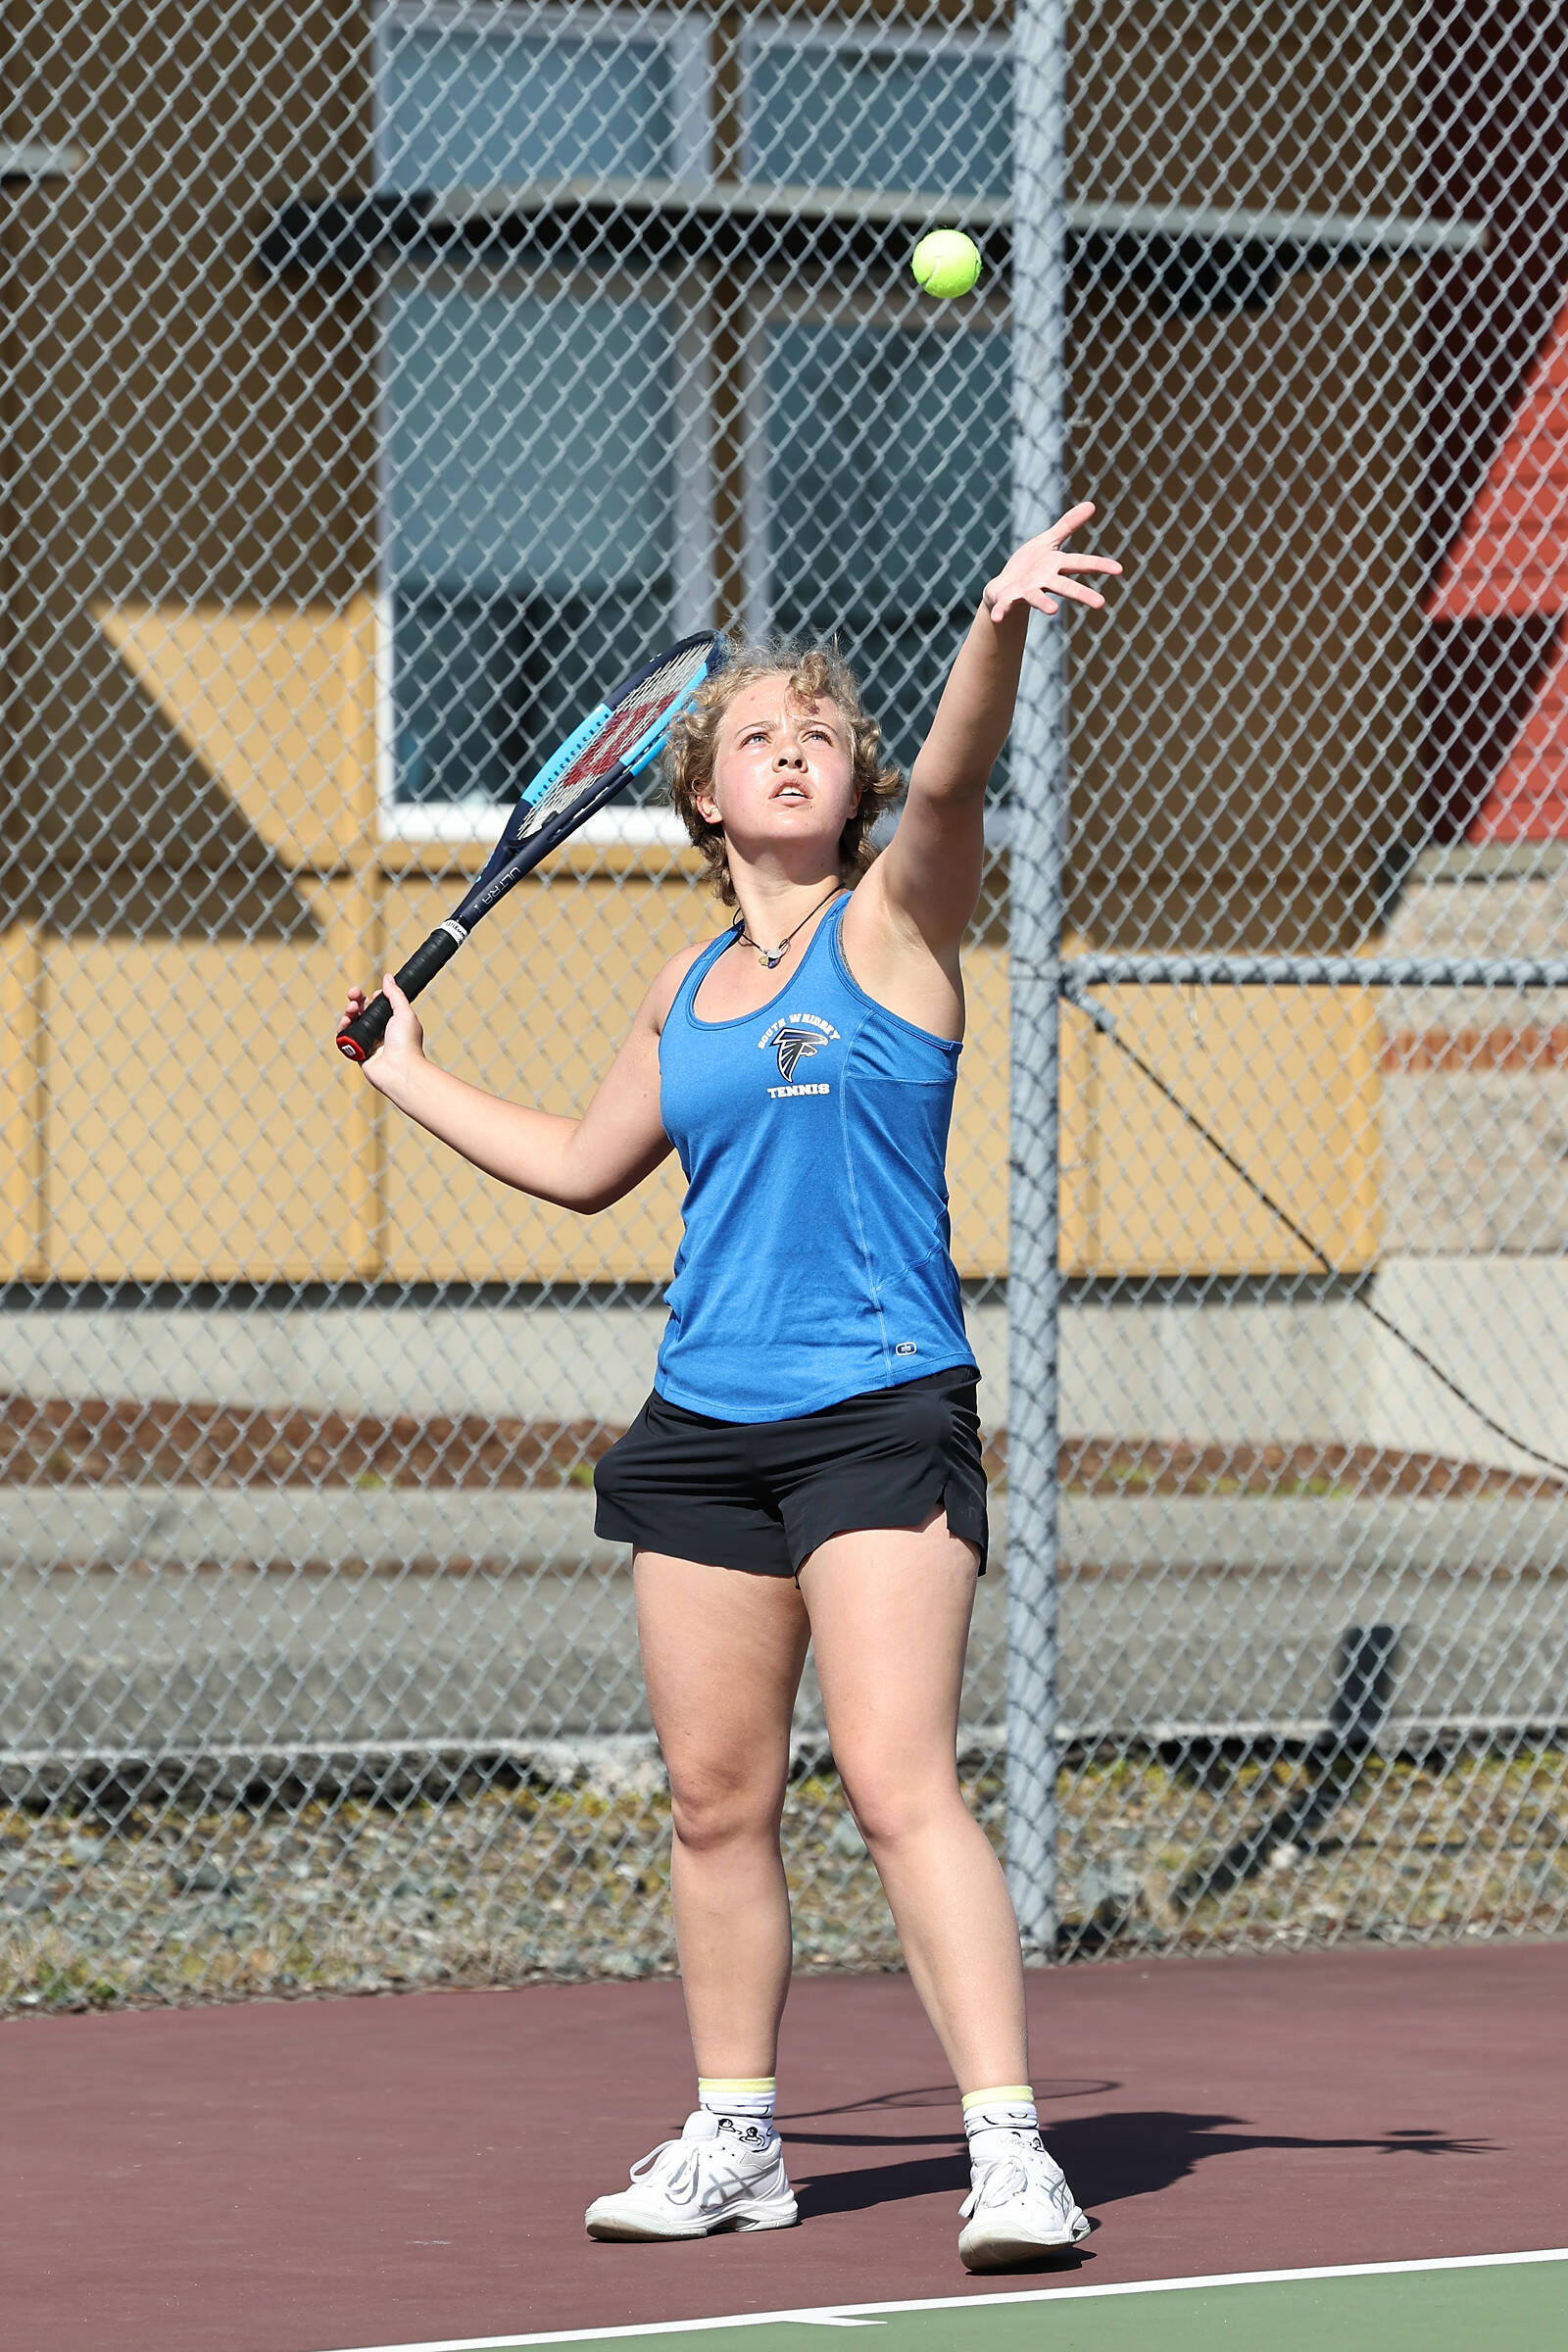 Photo by John Fisken
Junior Catie Beech of South Whidbey serves the ball during a tennis match against Coupeville on April 14. Coach Karyle Kramer said it was Beech’s first time playing singles this year and her match was the highlight of the day. Even though she lost 4-6, 6-7, Beech showed mental and physical toughness. Kramer said she worked on implementing strategies and tactics and made progress even during the match. “I’m proud of her for persevering and not giving up,” Kramer said.